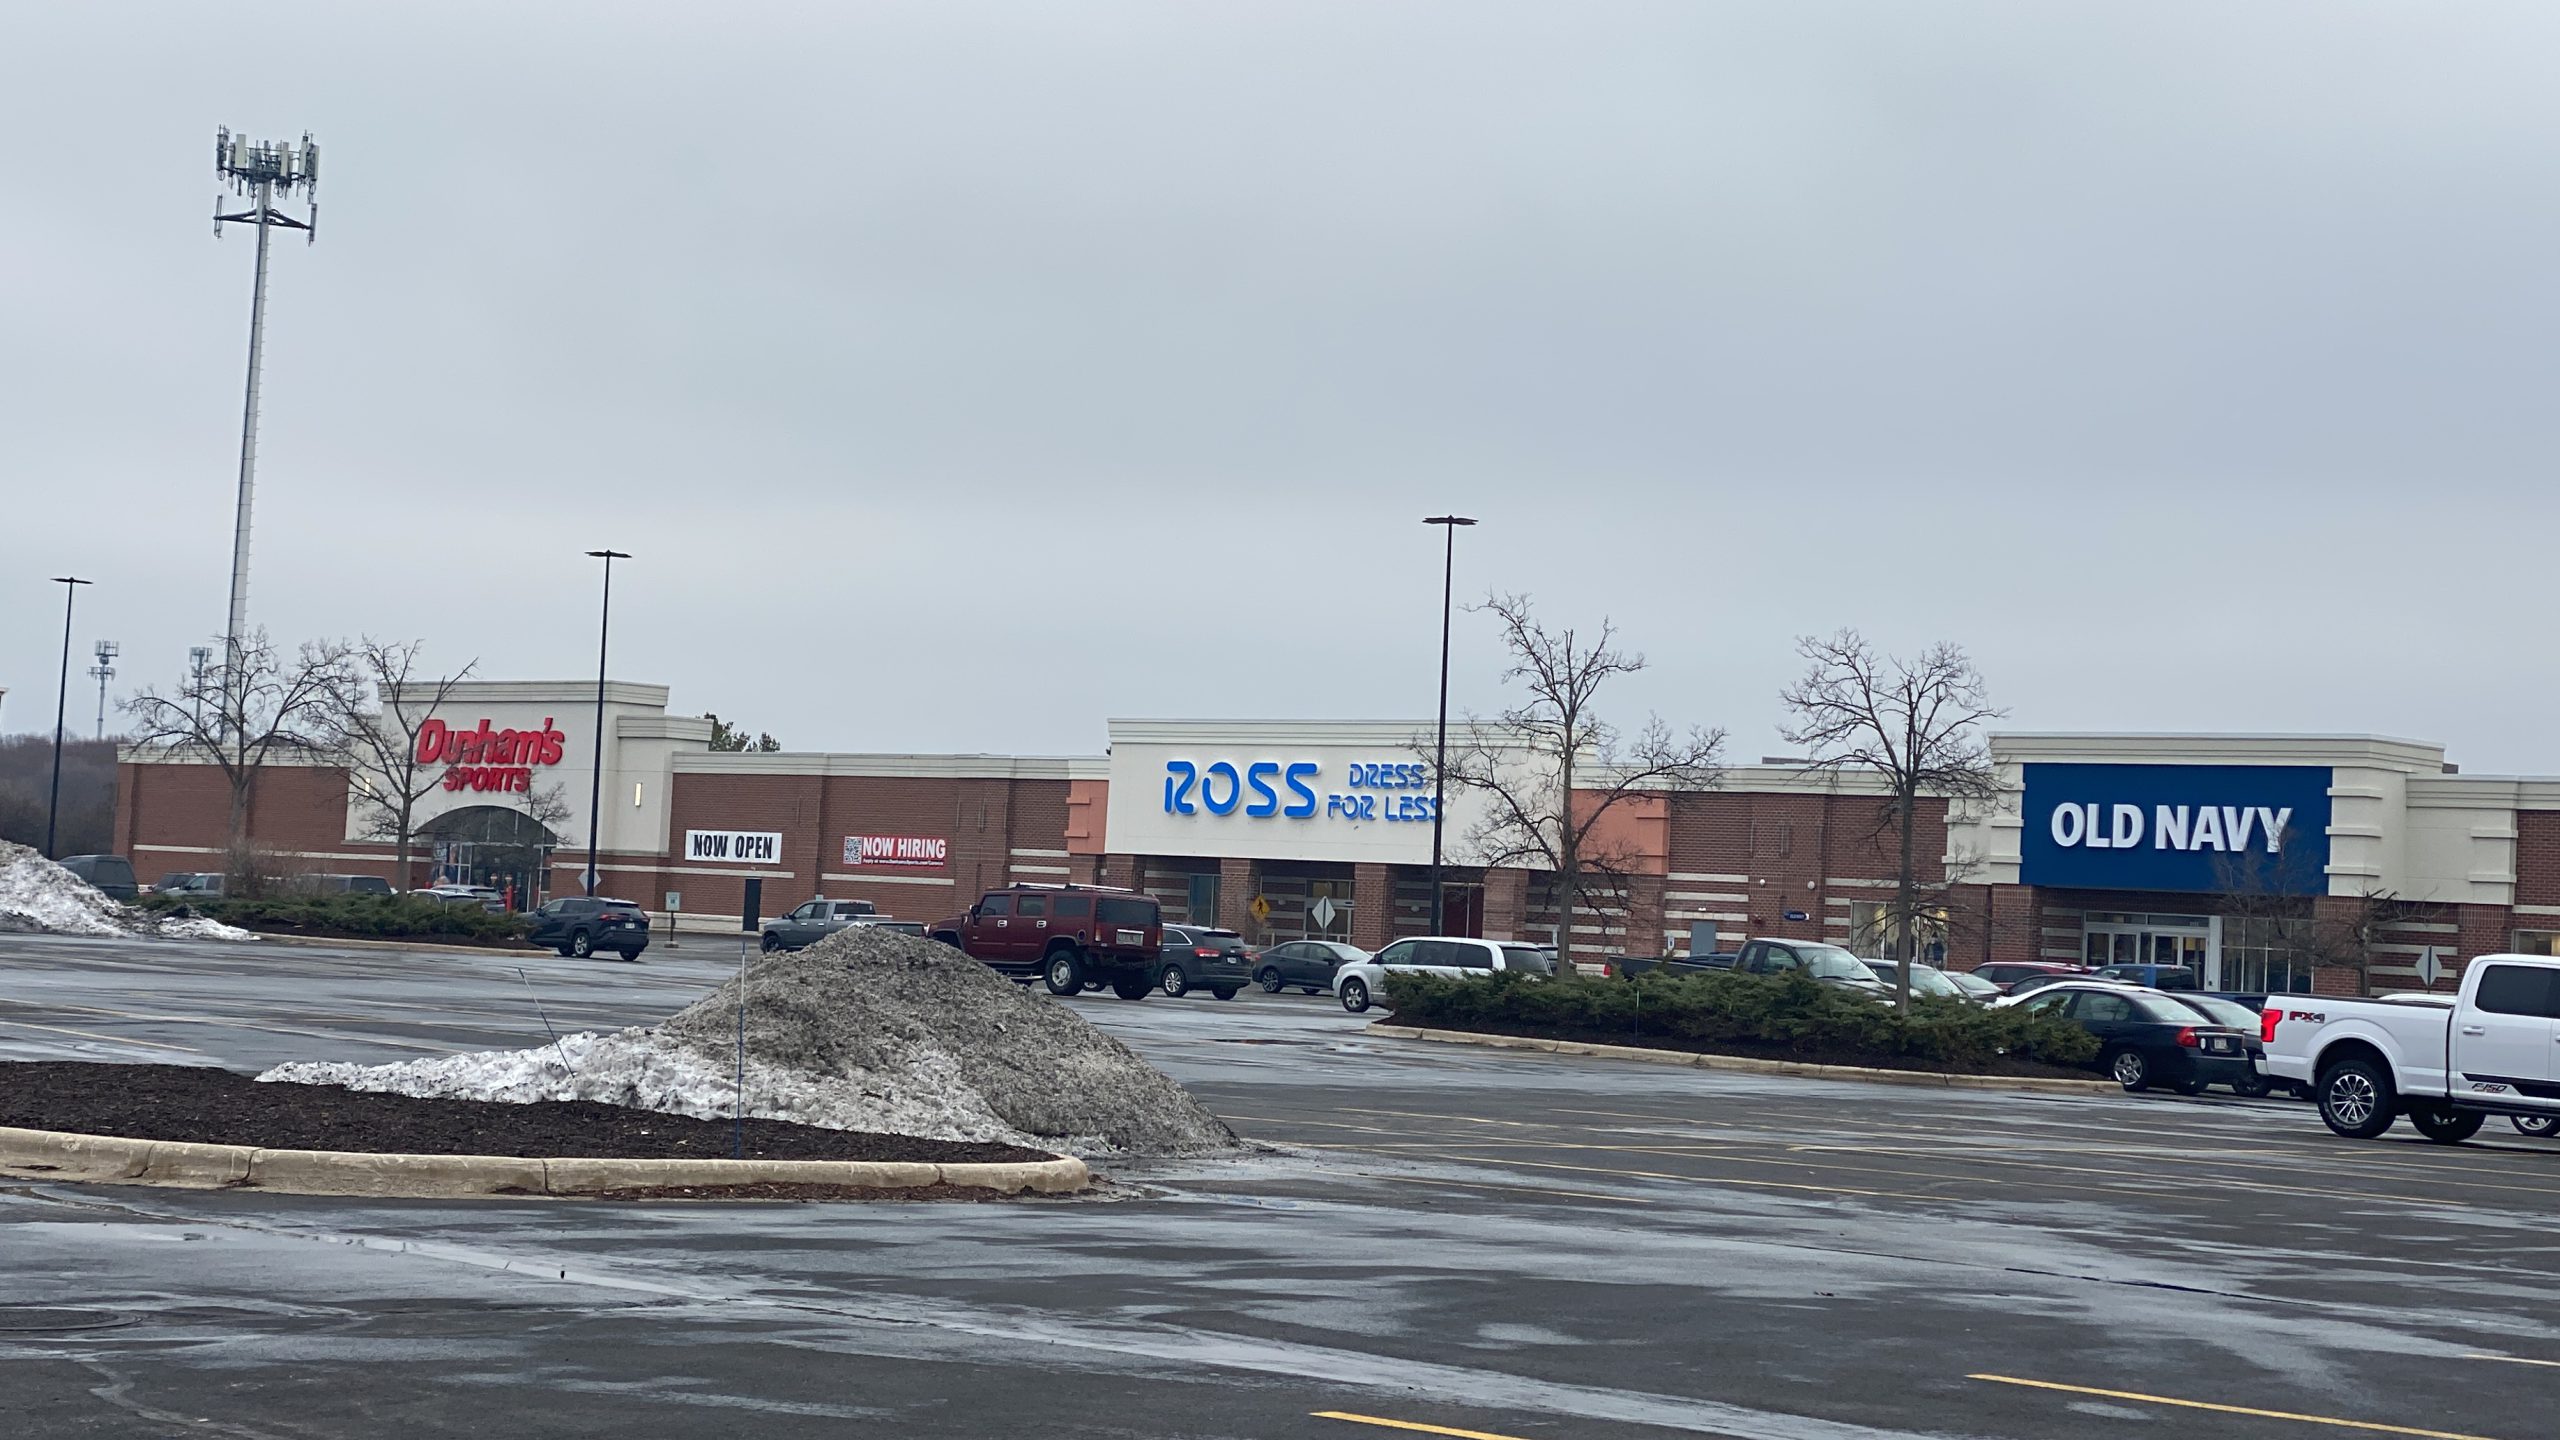 If you build it, they will come: Ross Dress for Less opens on east side -  Point/Plover Metro Wire